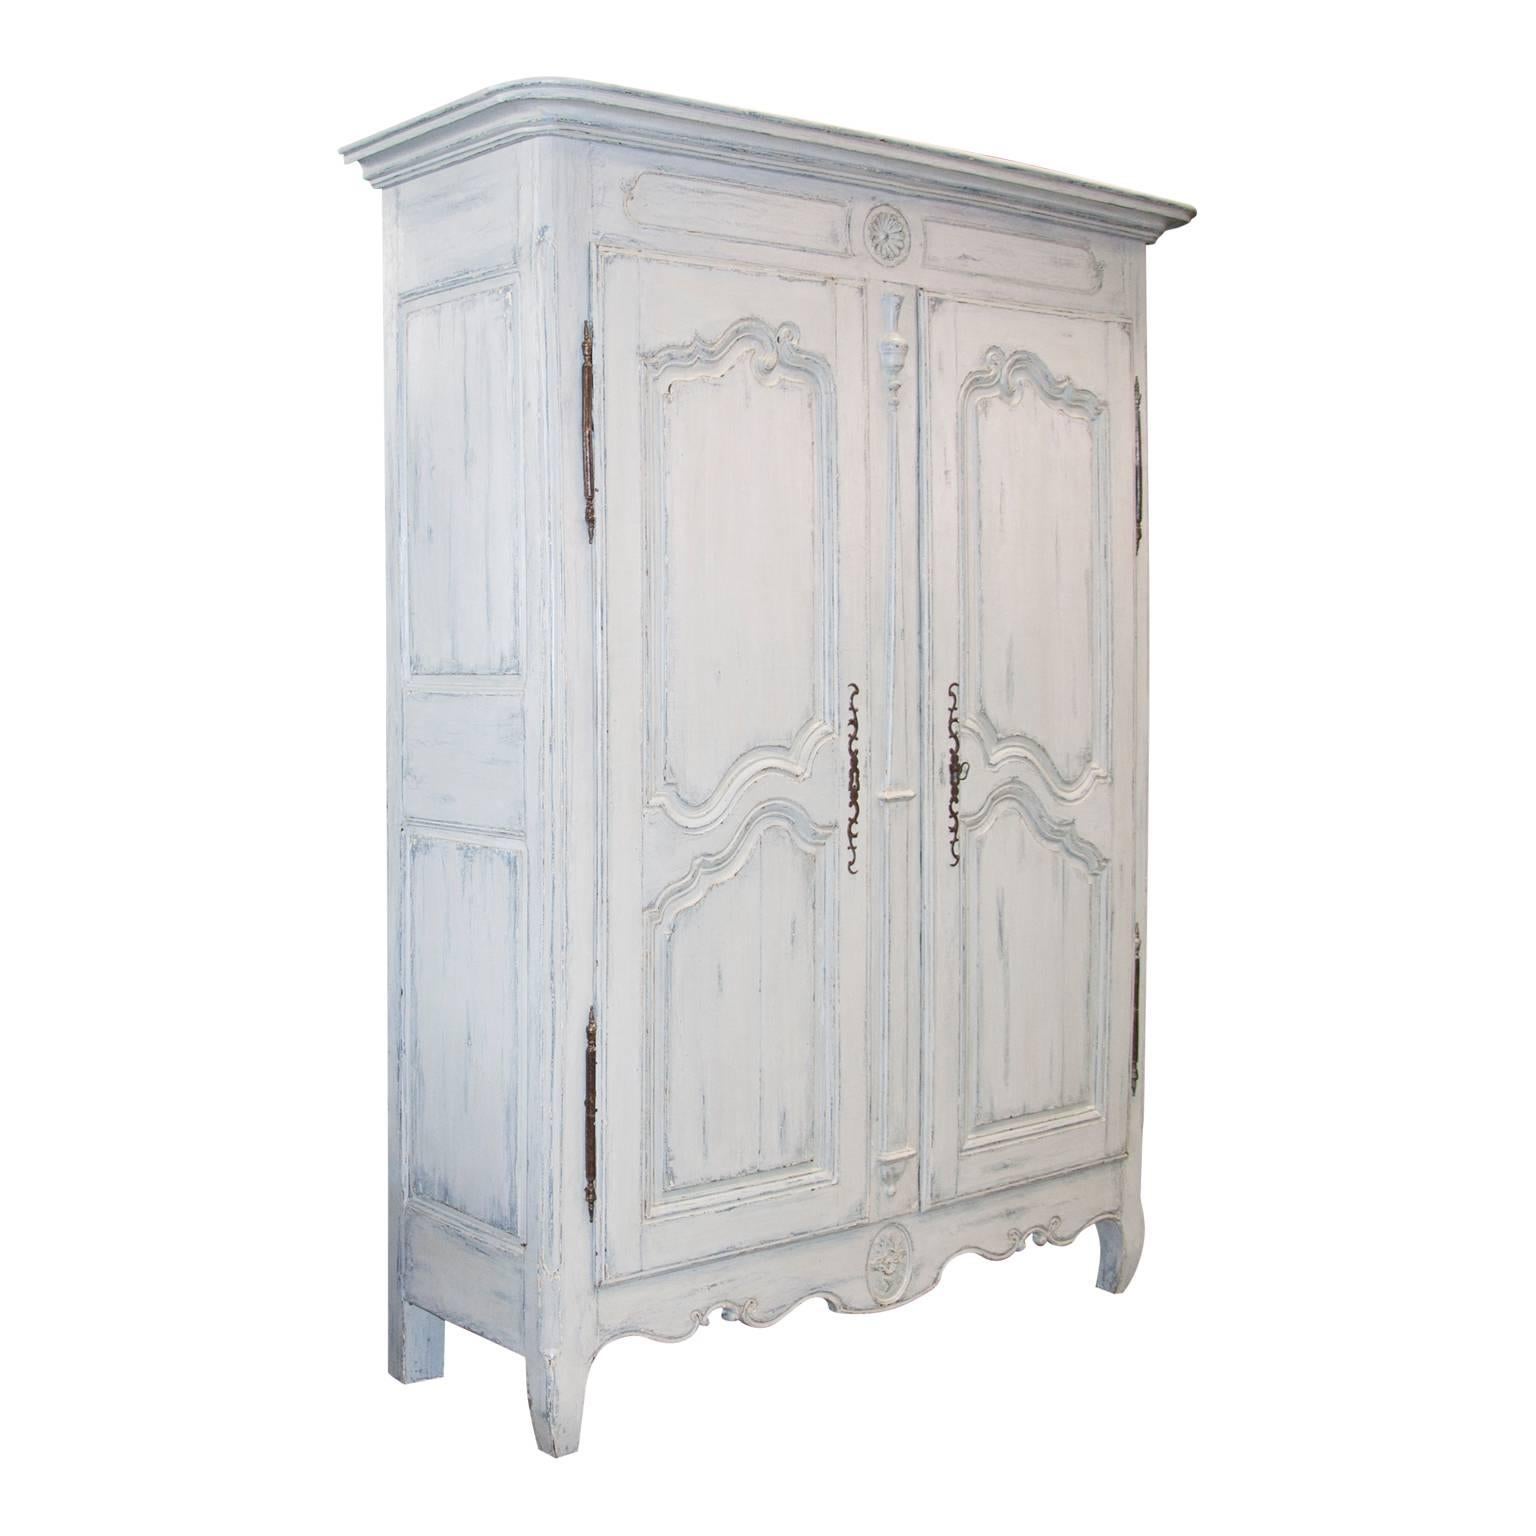 A very exceptional and rare Bordelais Armoire cupboard from the French Louis XV period in a light blue patina finish. The cabinet opens with two beautifully paneled doors, which are enclosed by rich carvings and exceptional panels. The wood of the